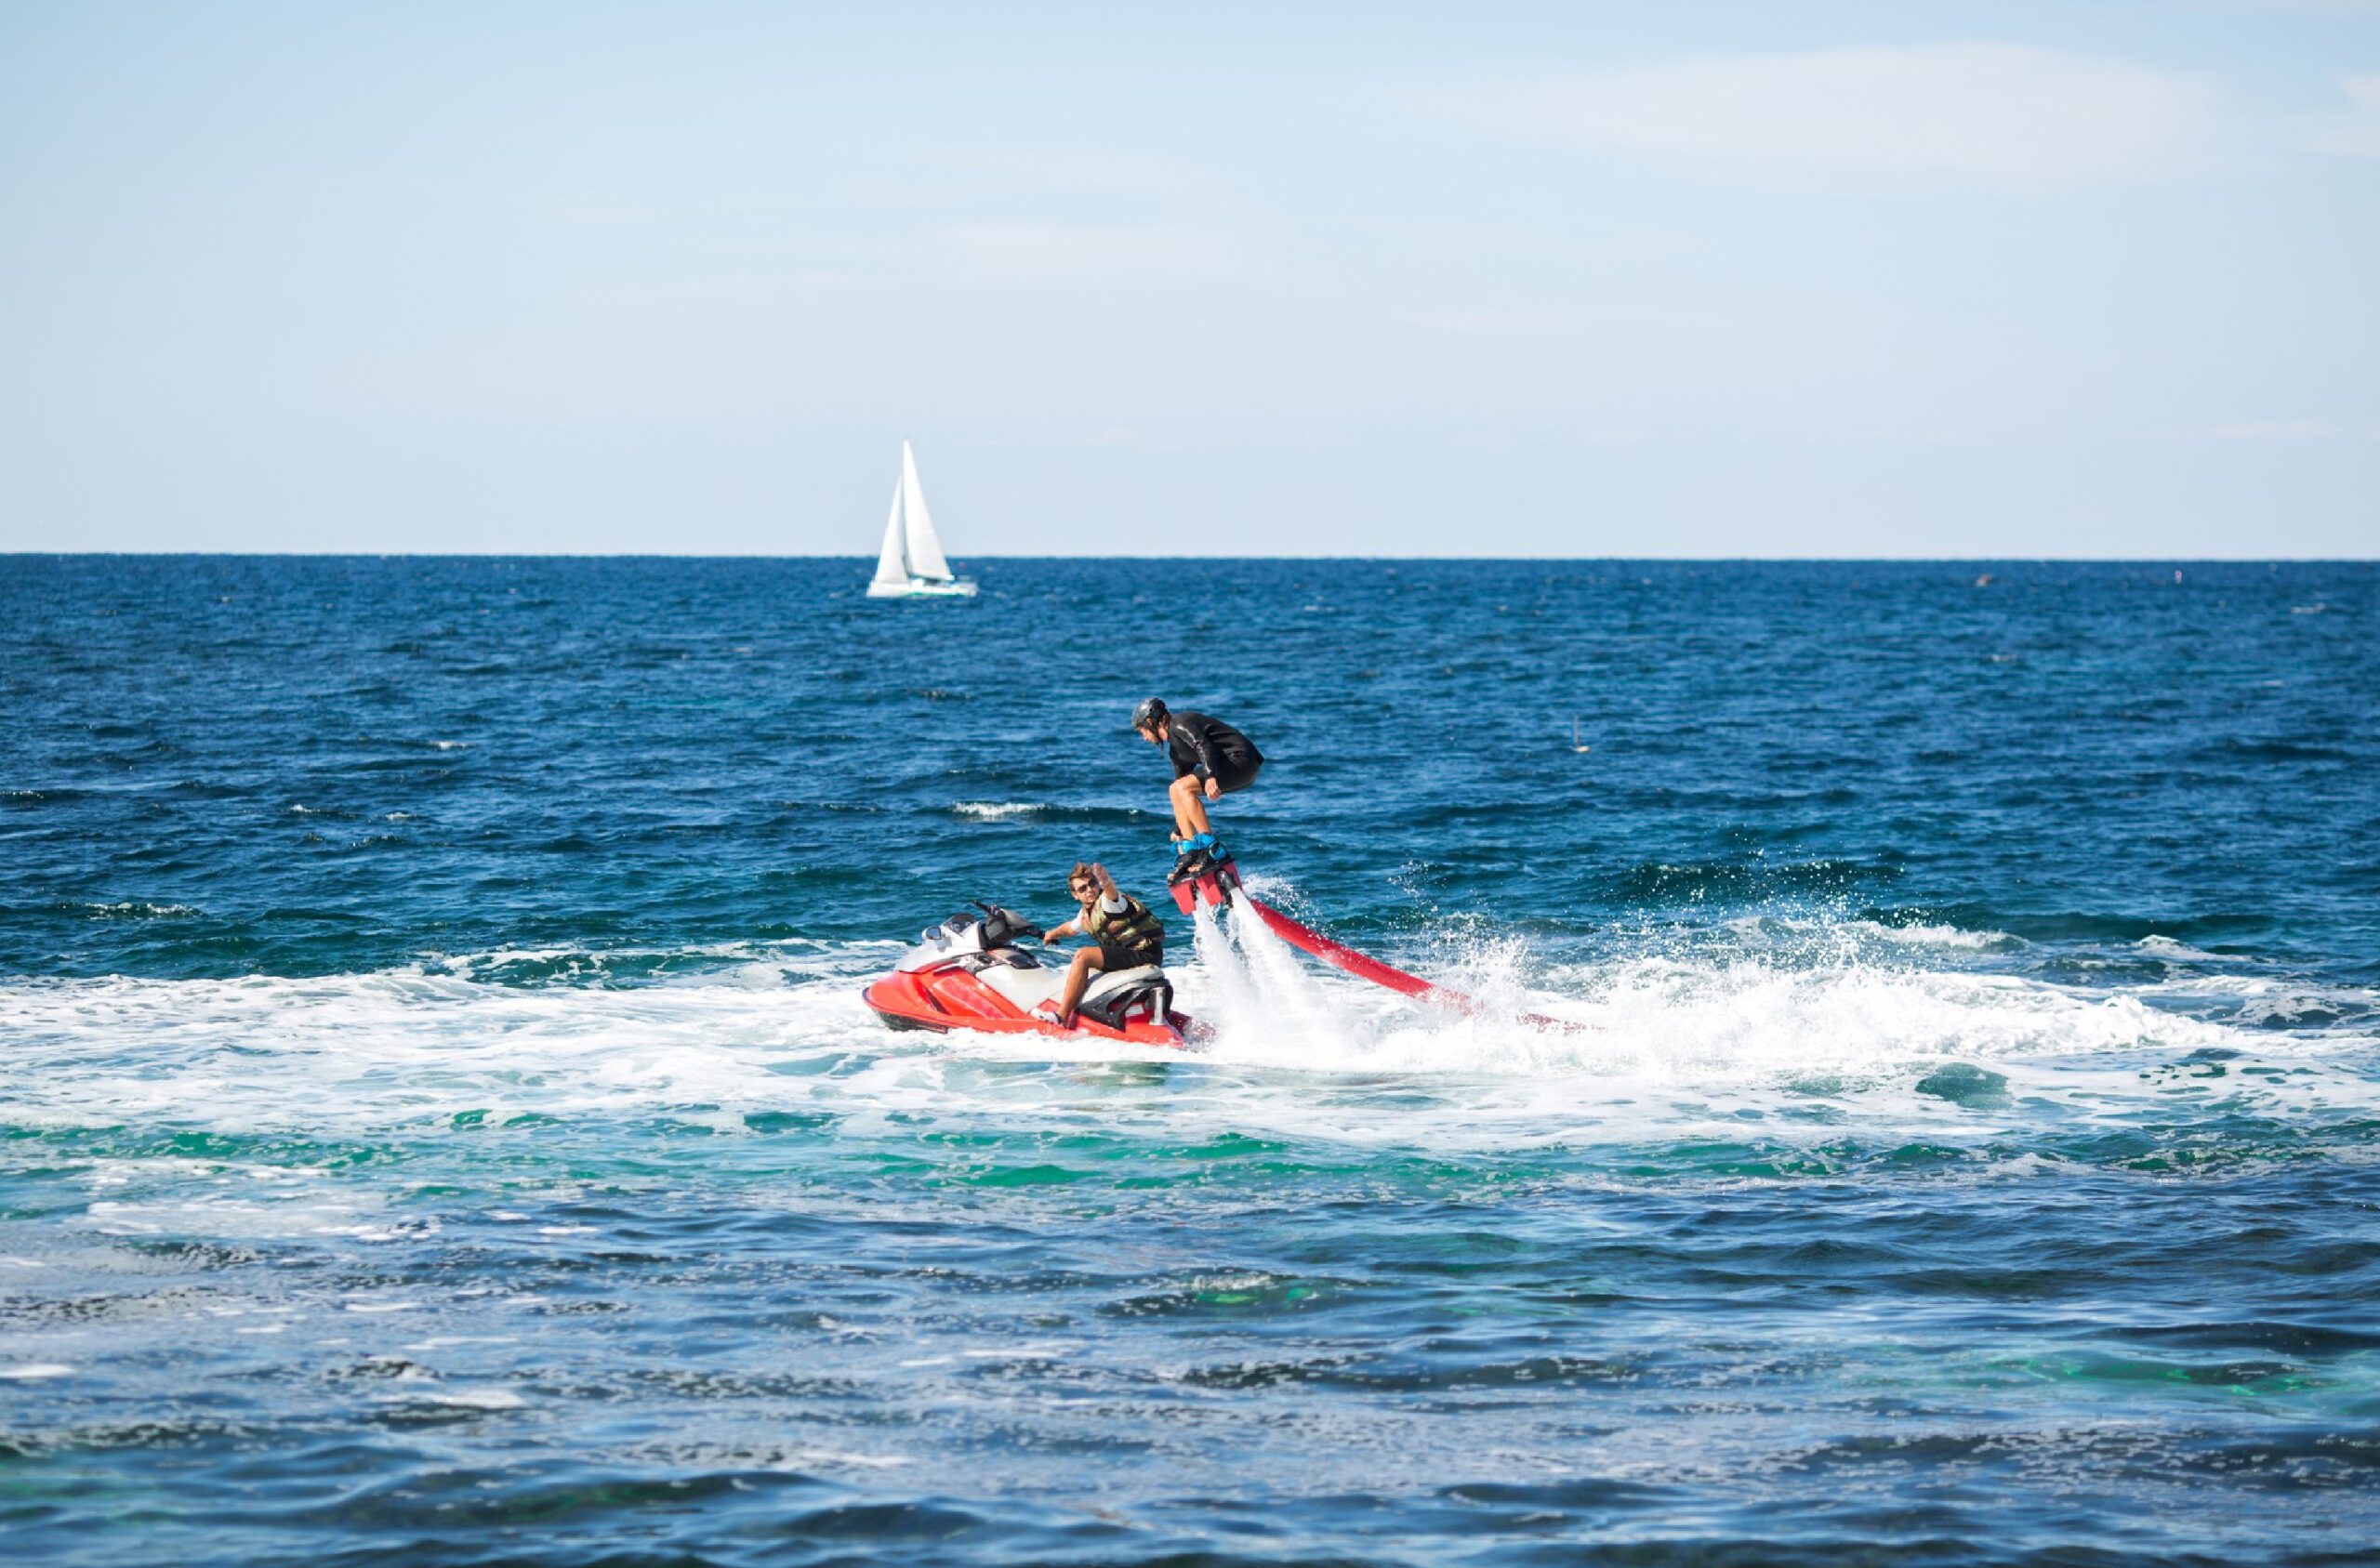 Rush through the waves with Jet Ski Ride by Dubai yachts